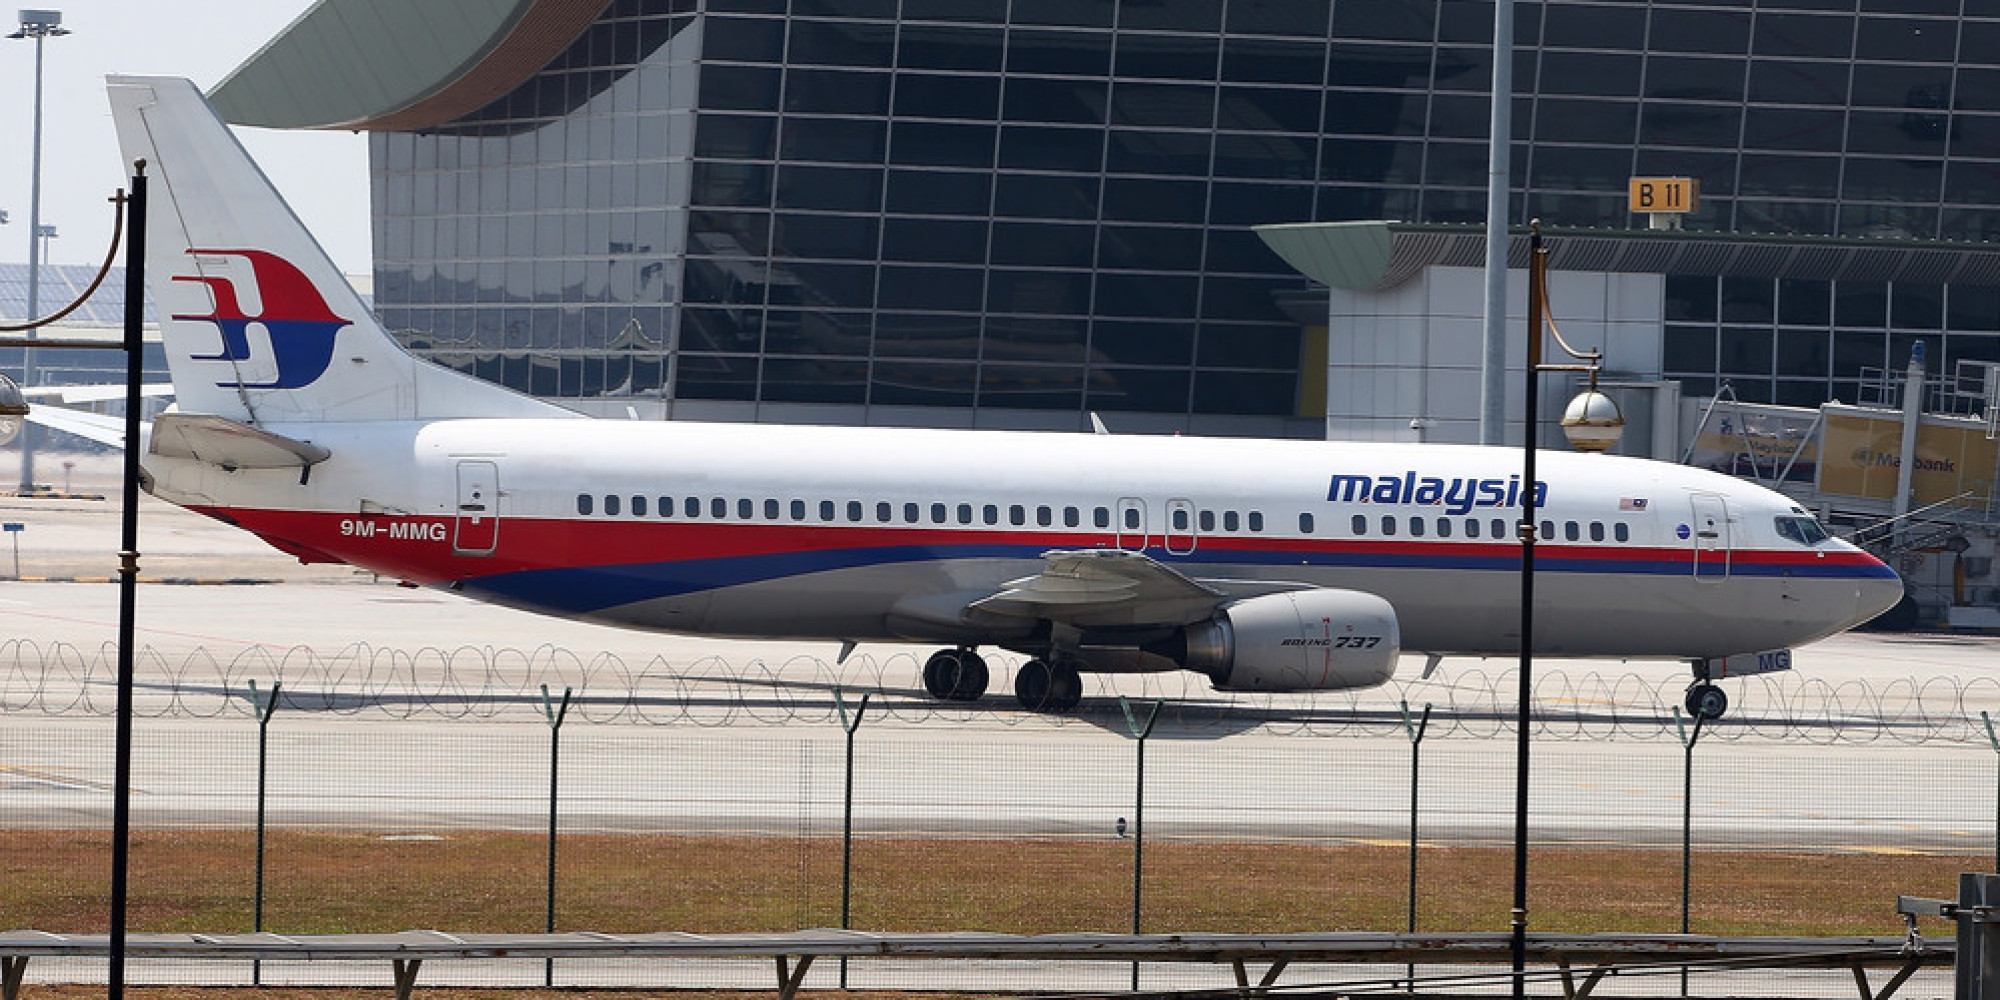 Malaysia Airlines Denies Crash Report, Says Flight MH370 Still Missing